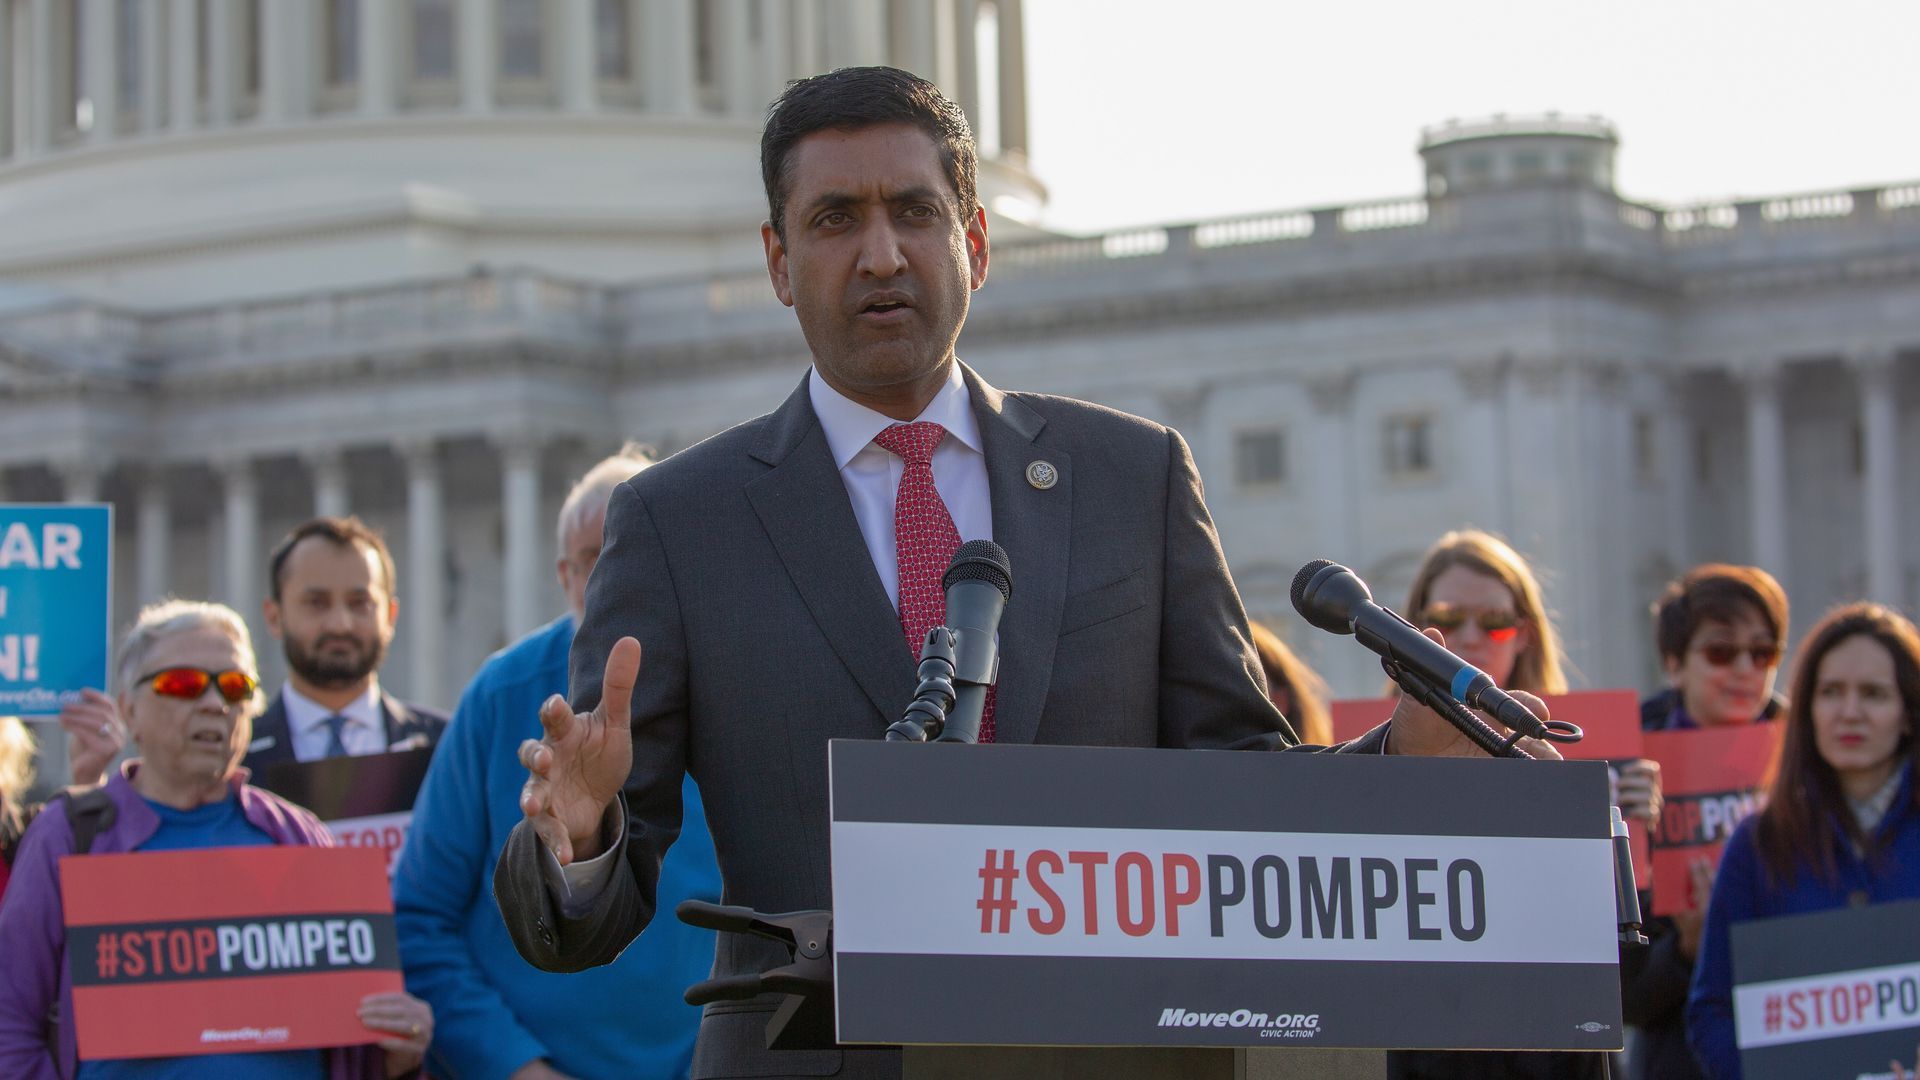 U.S. Rep Ro Khanna, speaking at a rally